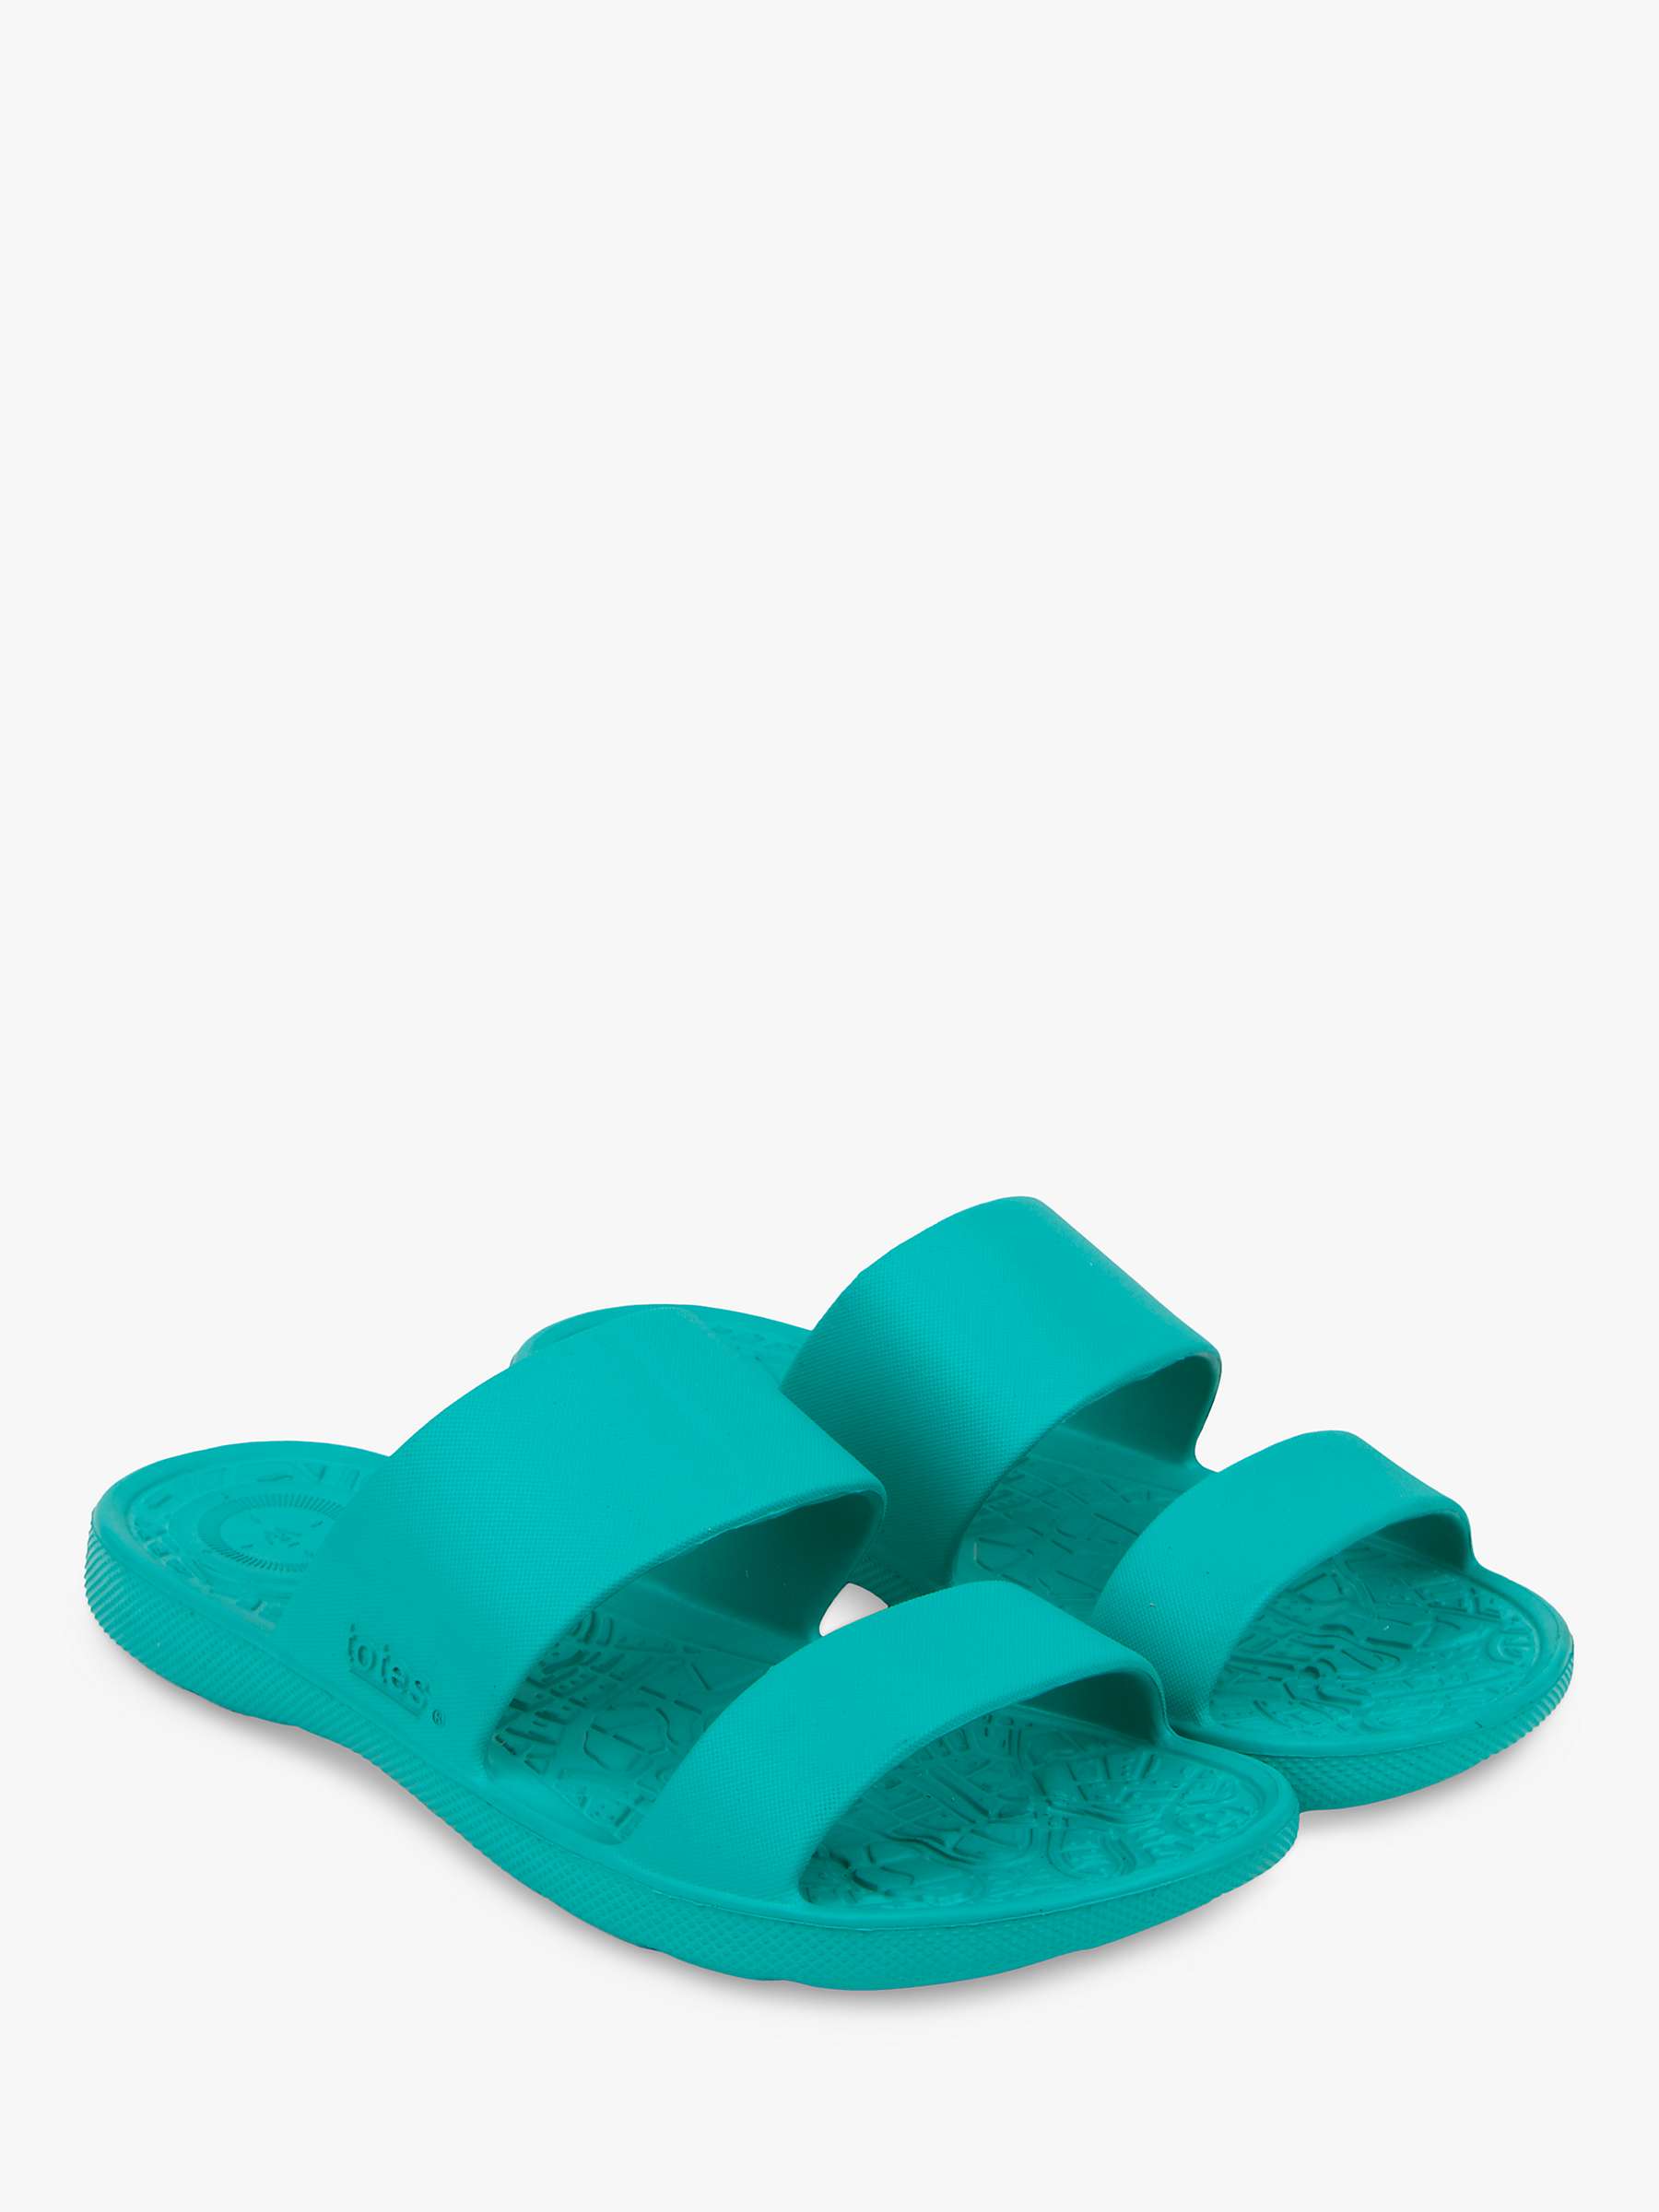 Buy totes SOLBOUNCE Double Strap Slider Sandals Online at johnlewis.com